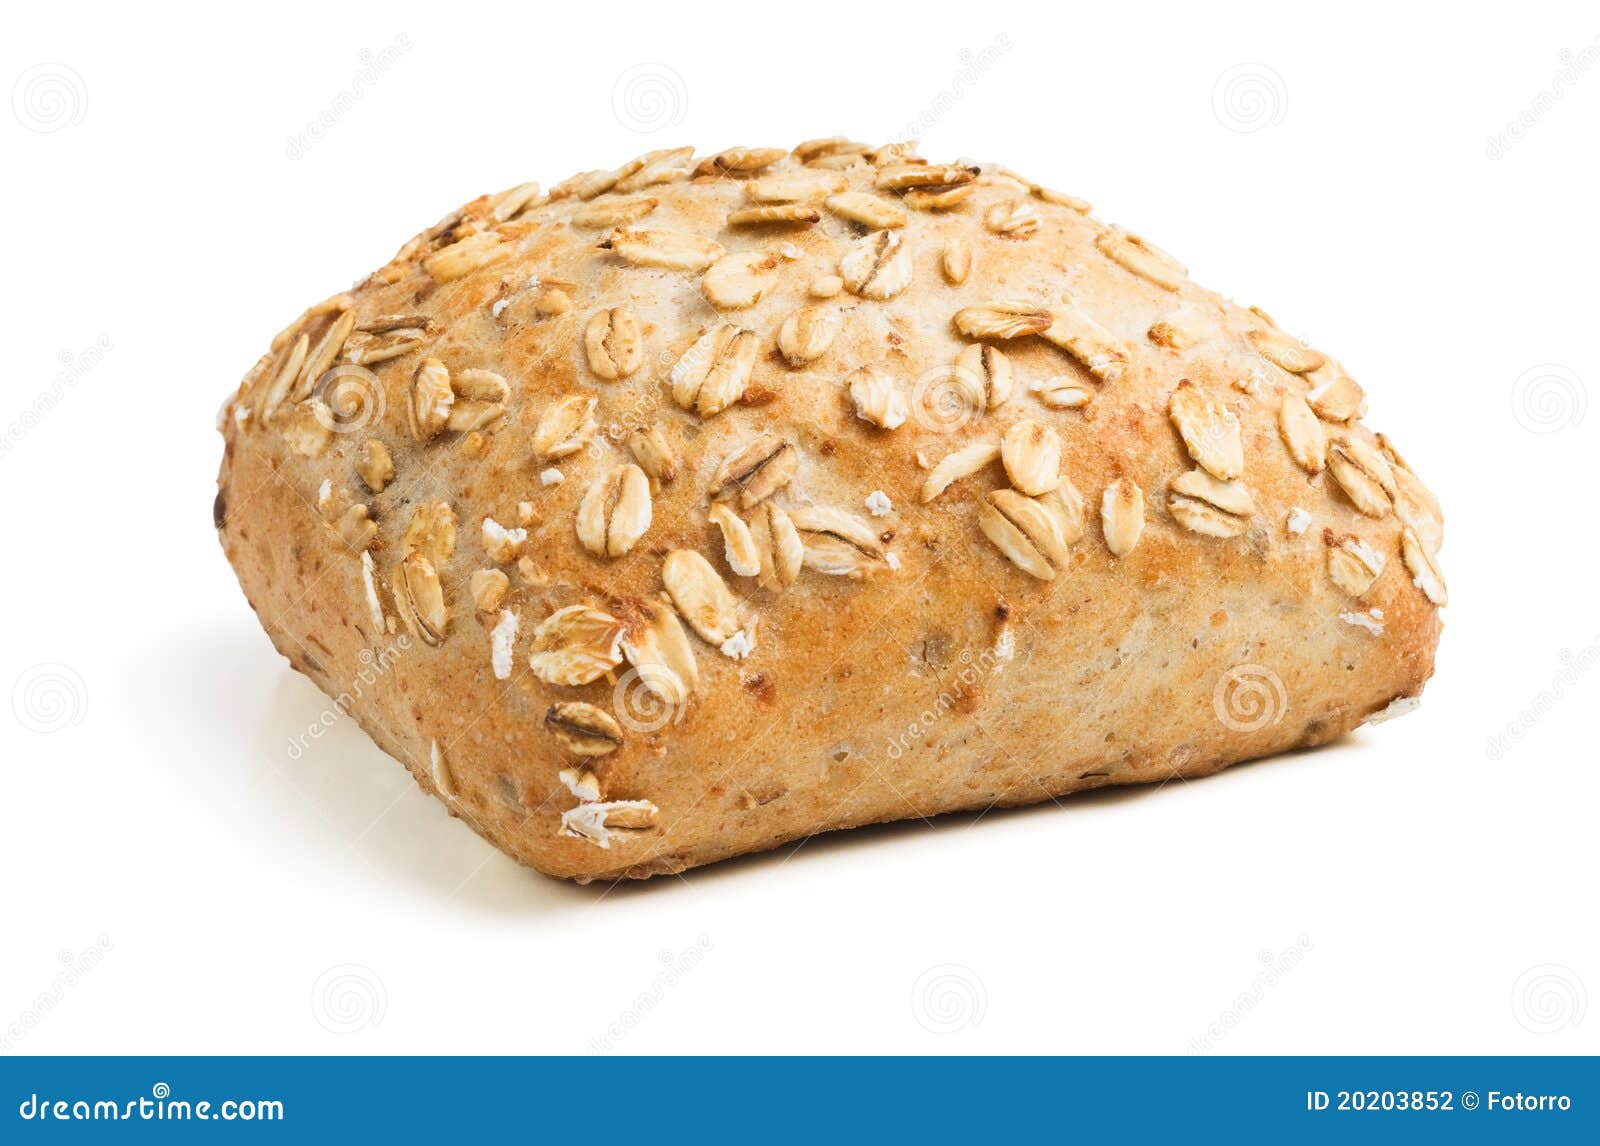 Oatmeal roll stock photo. Image of detailed, tasty, delicious - 20203852